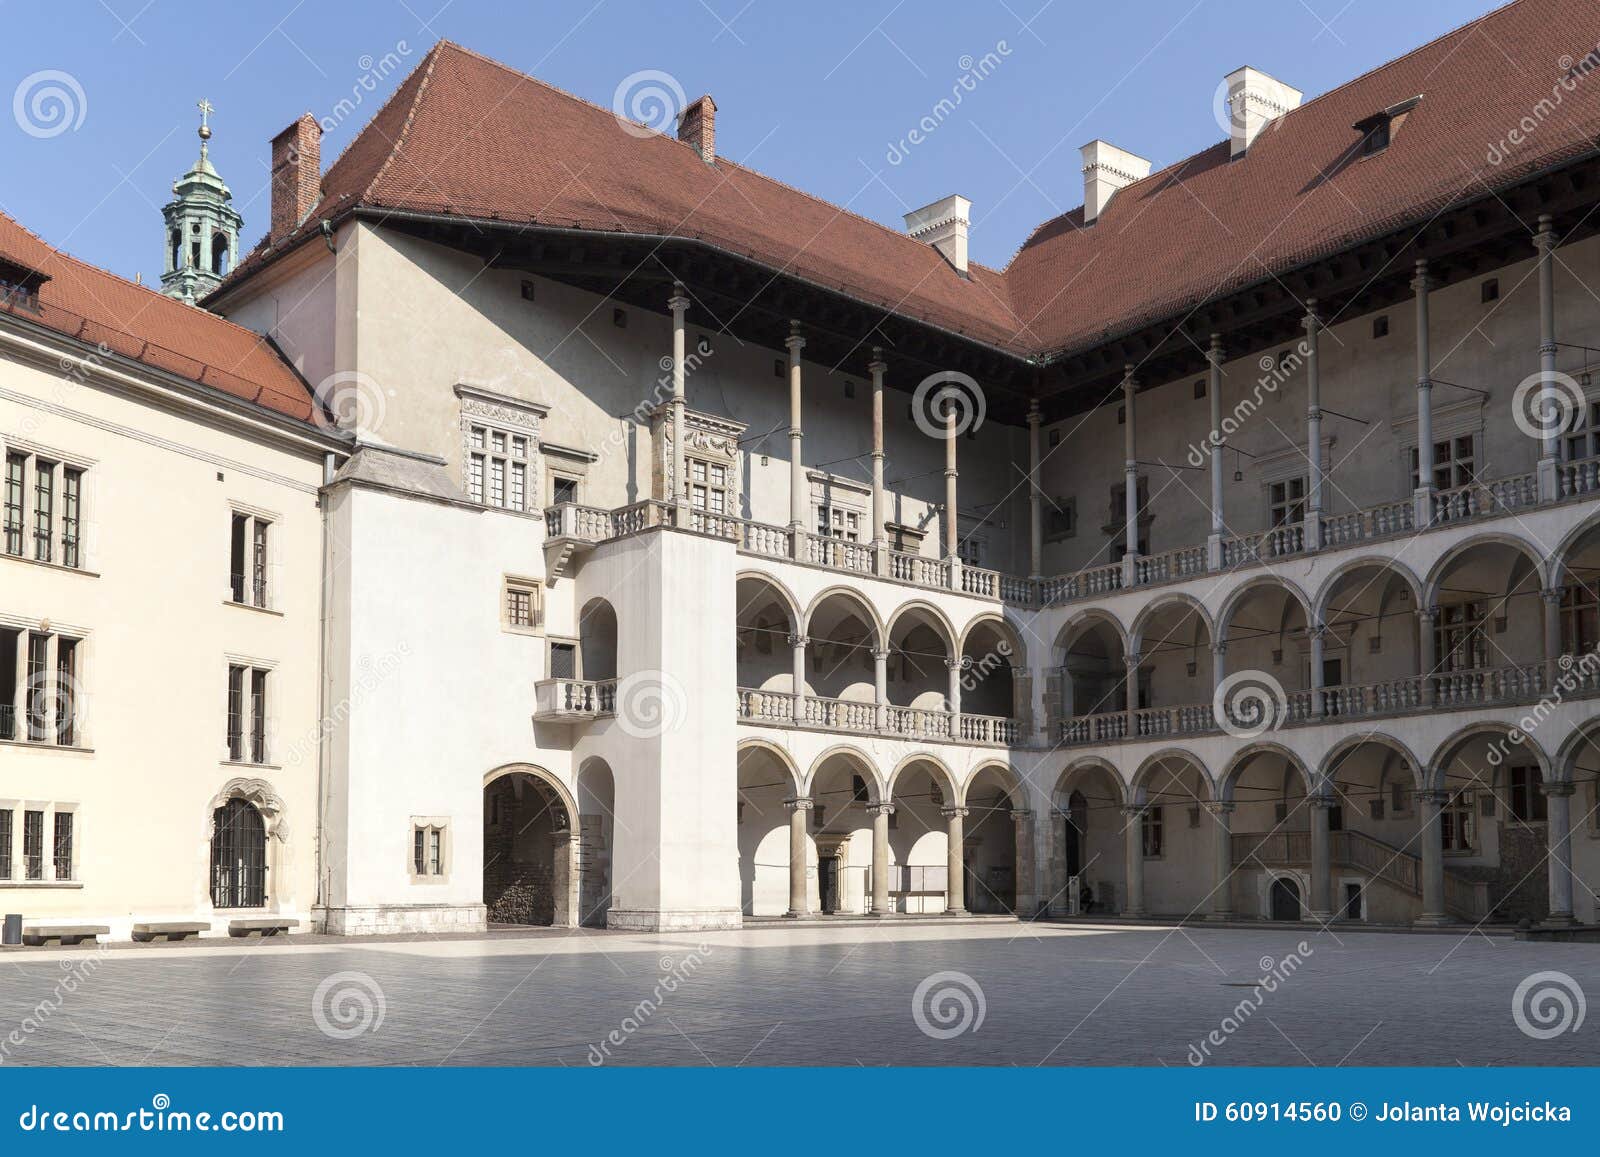 arcaded courtyard of royal castle wawel in cracow in poland